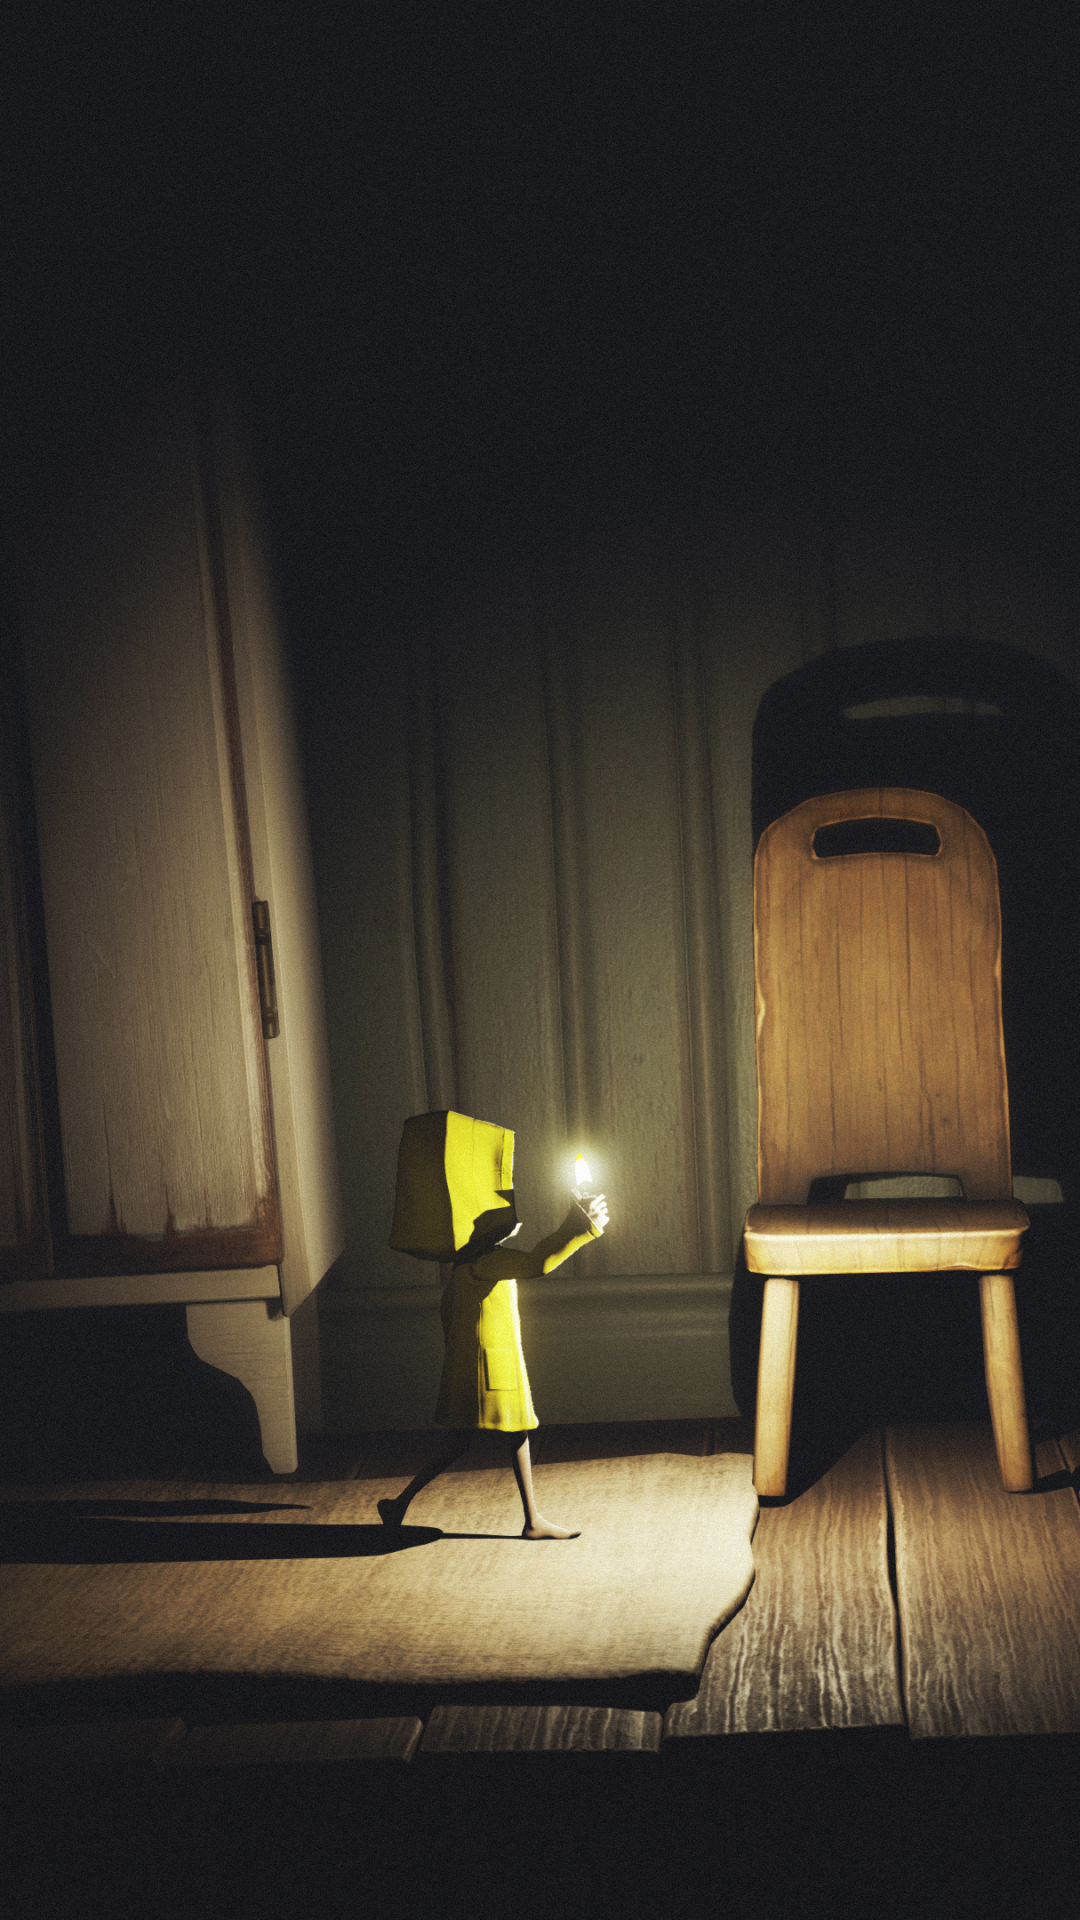 Little Nightmares II Phone Wallpaper - Mobile Abyss